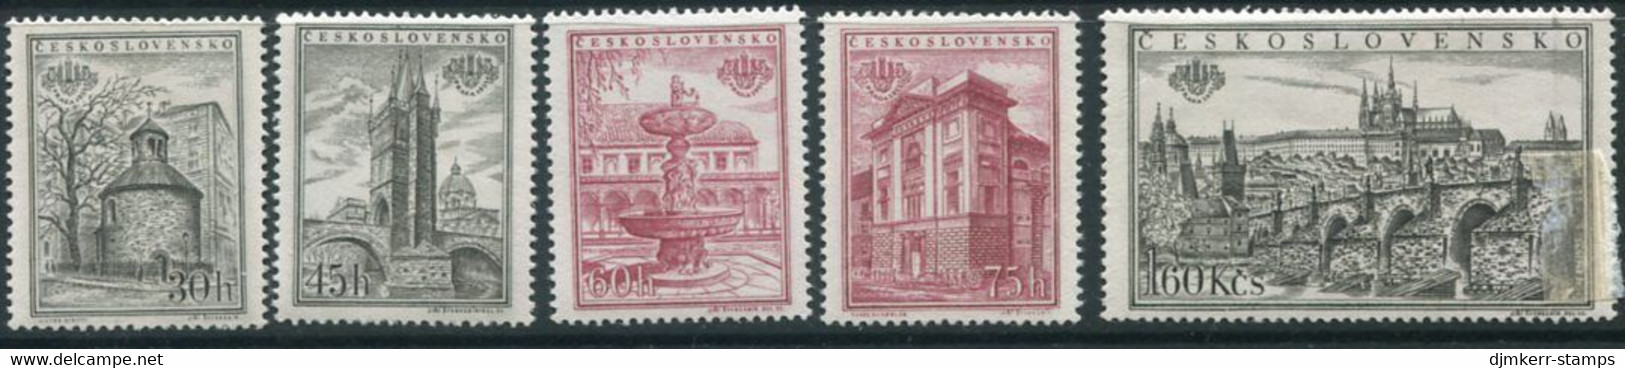 CZECHOSLOVAKIA 1955 Praga 1955 Stamp Exhibition Perforated Singles Ex Block MNH / **.  Michel 934-38A - Unused Stamps